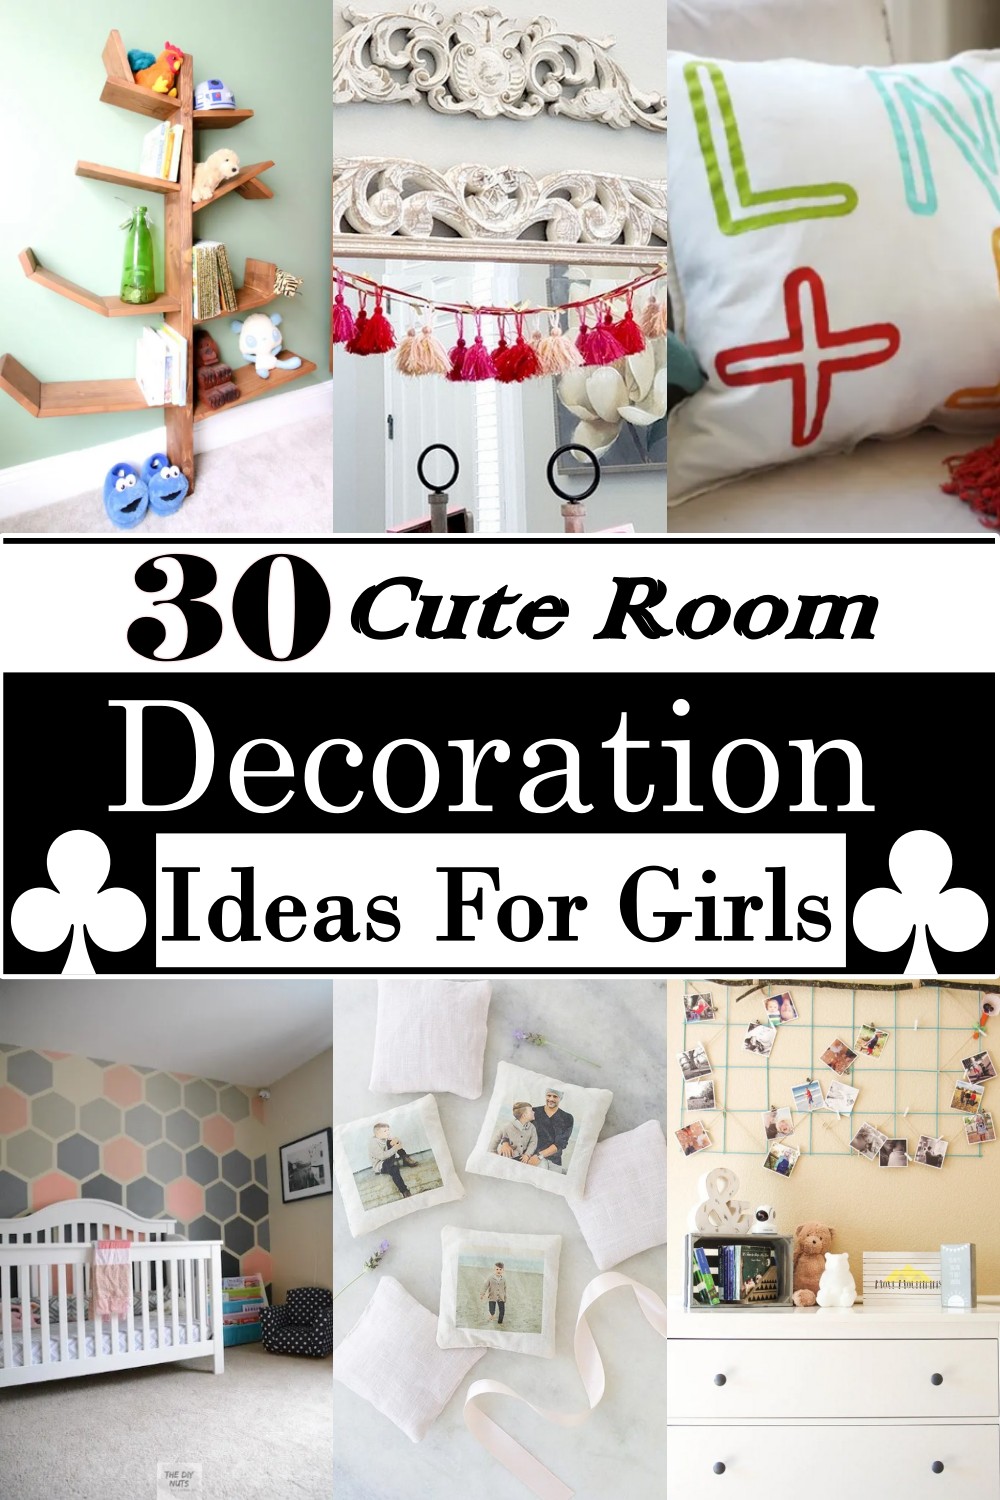 Cute Room Decoration Ideas For Girls